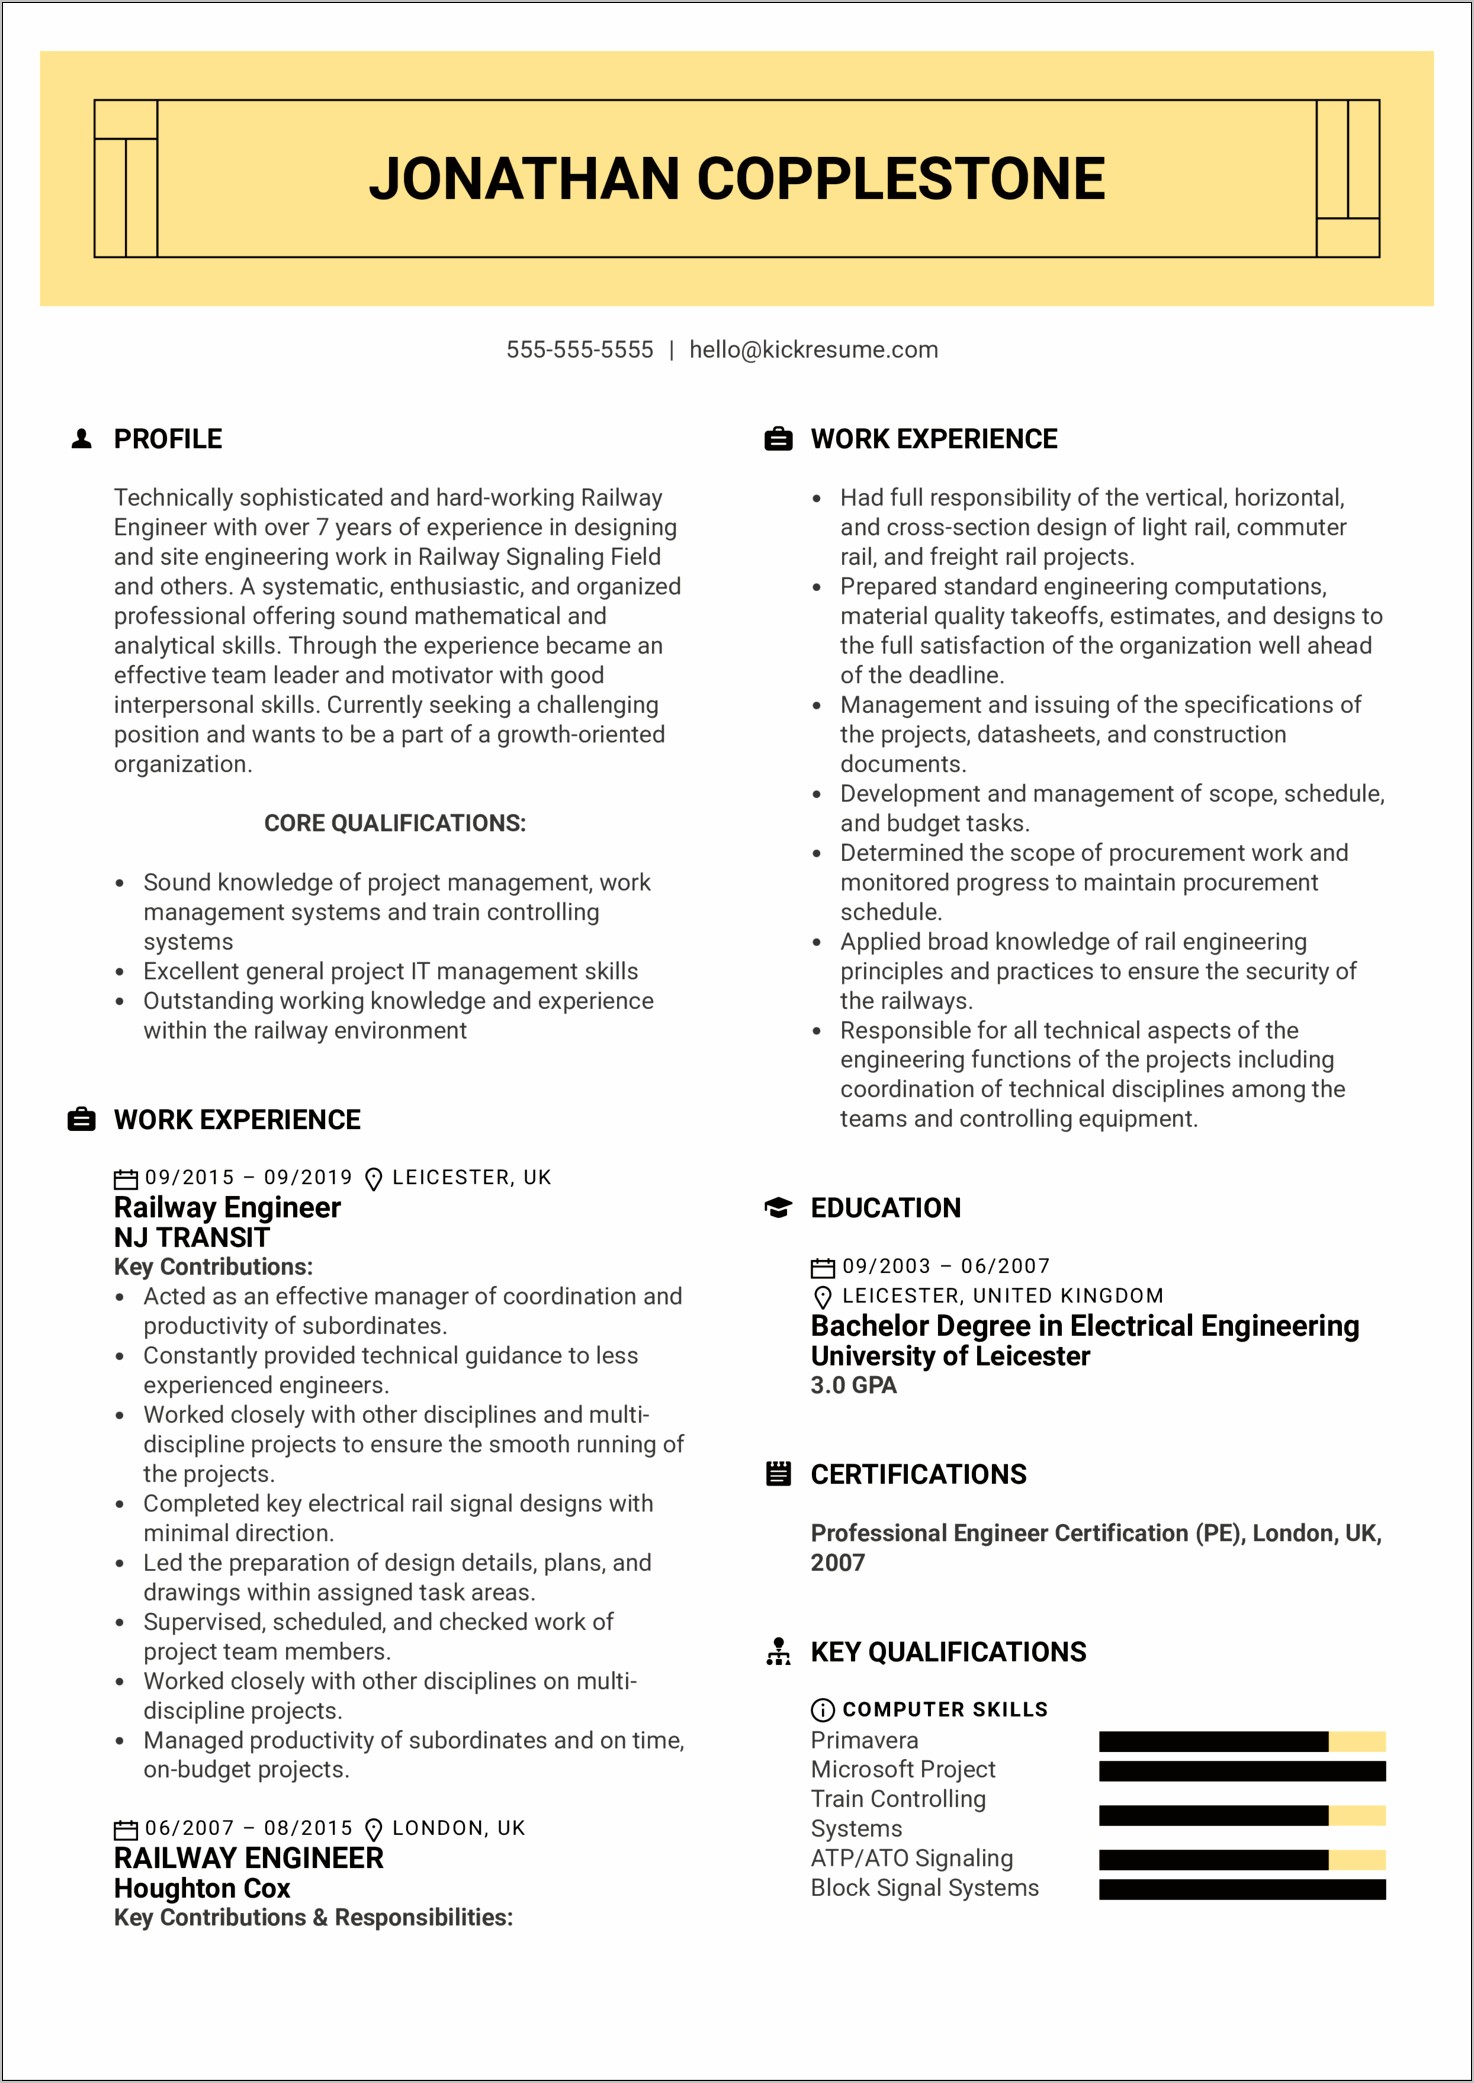 Need Help With Electrical Skill On Resume